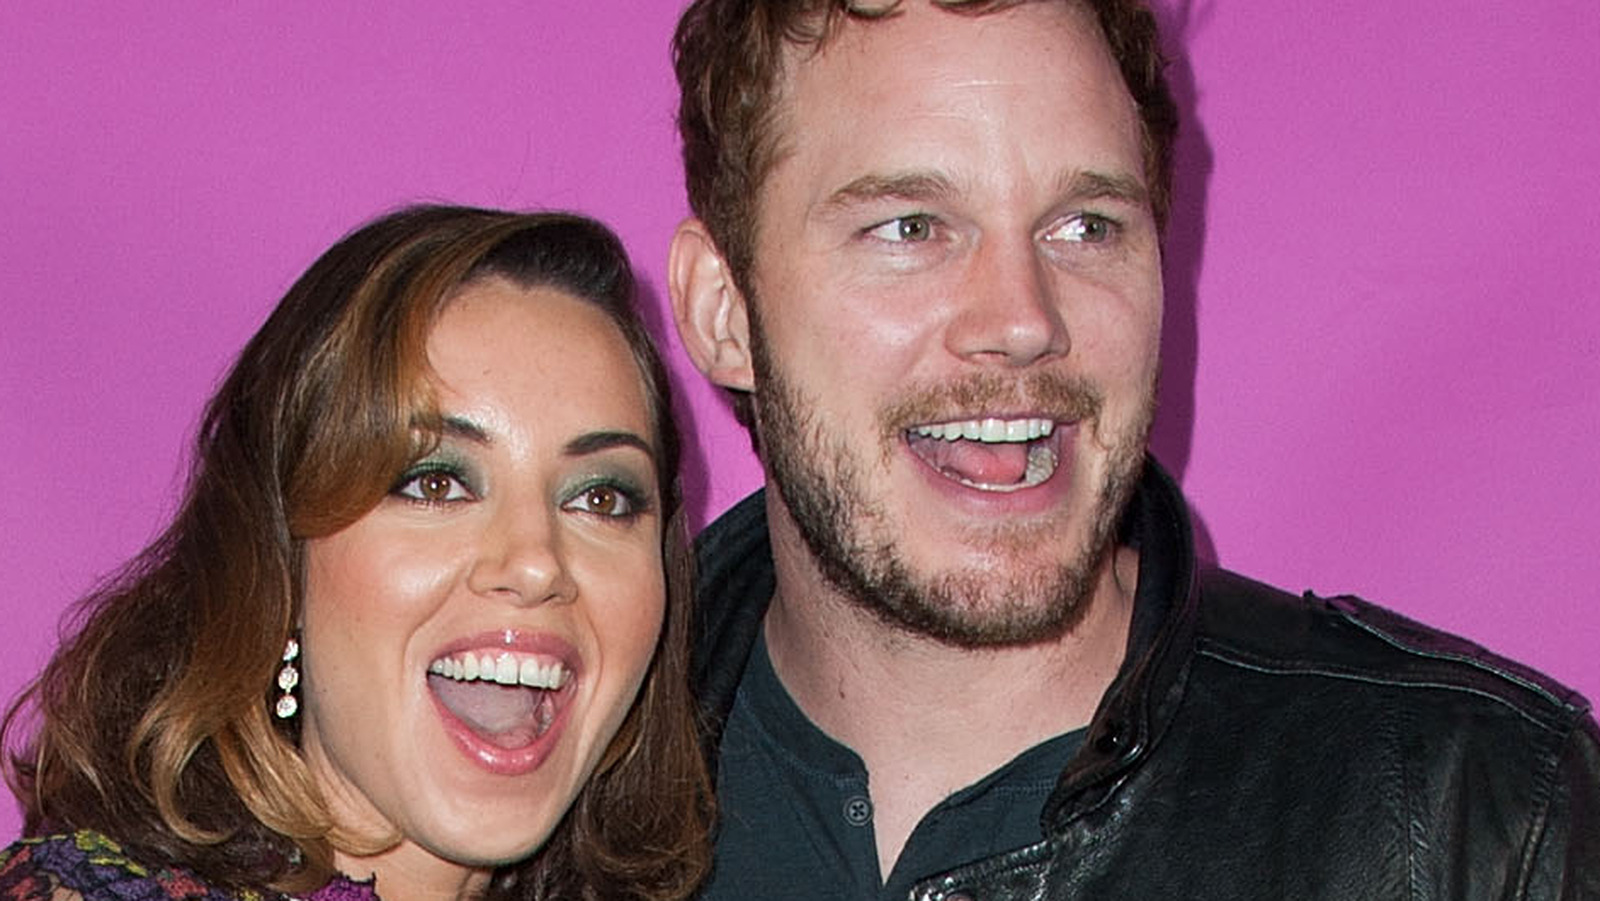 Chris Pratt And Aubrey Plaza smiling on camera in an event